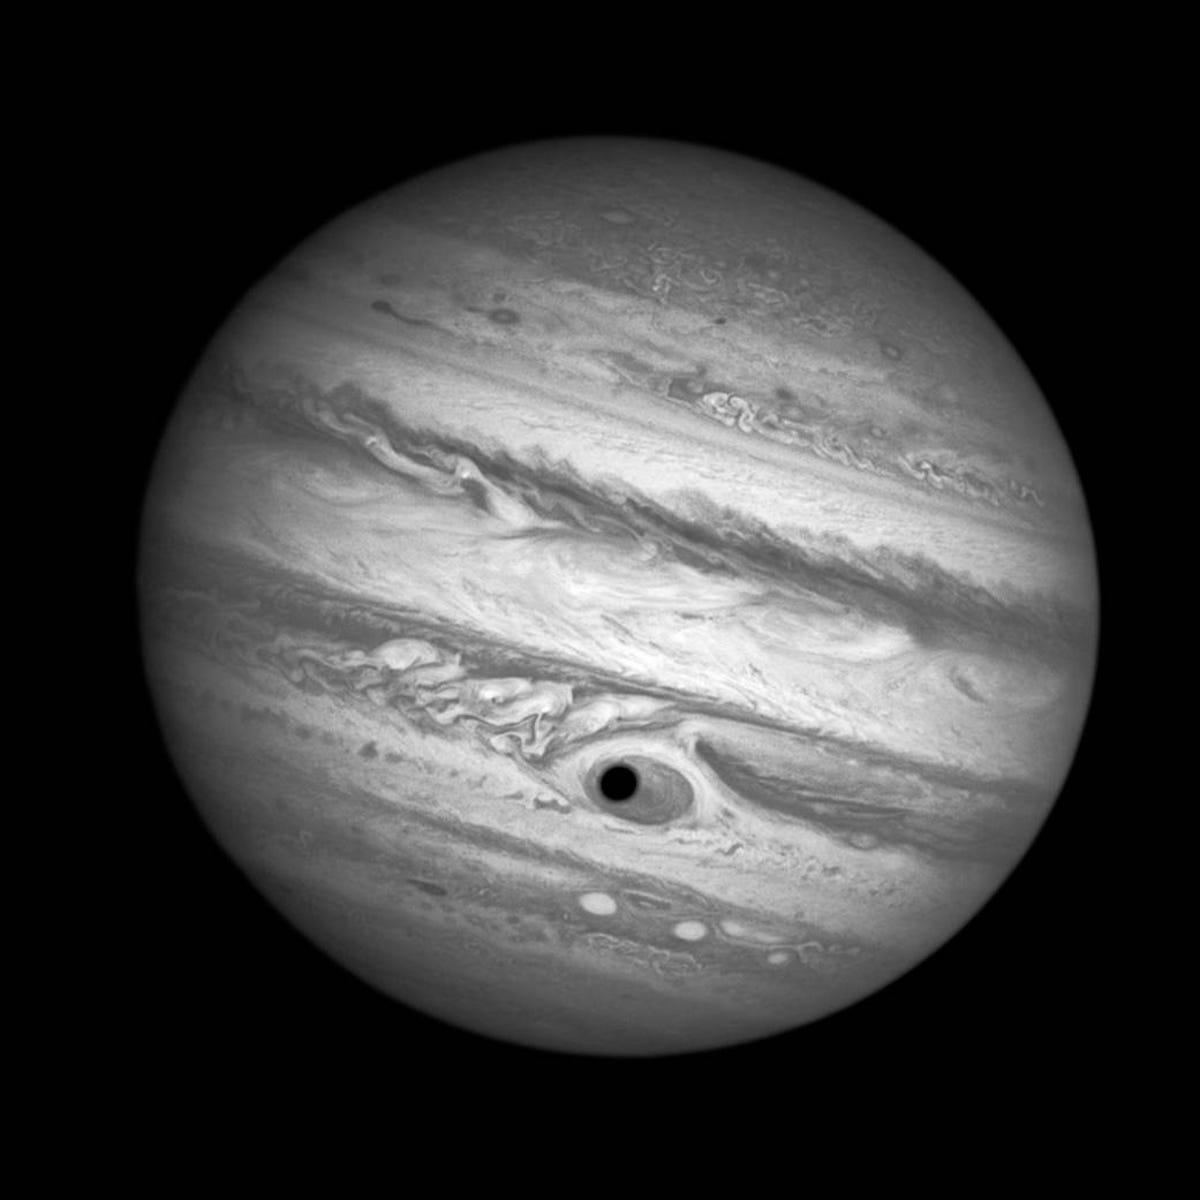 Jupiter in black and white looks like a swirly marble with a dark moon shadow falling on an oval storm, making it look like an eye.